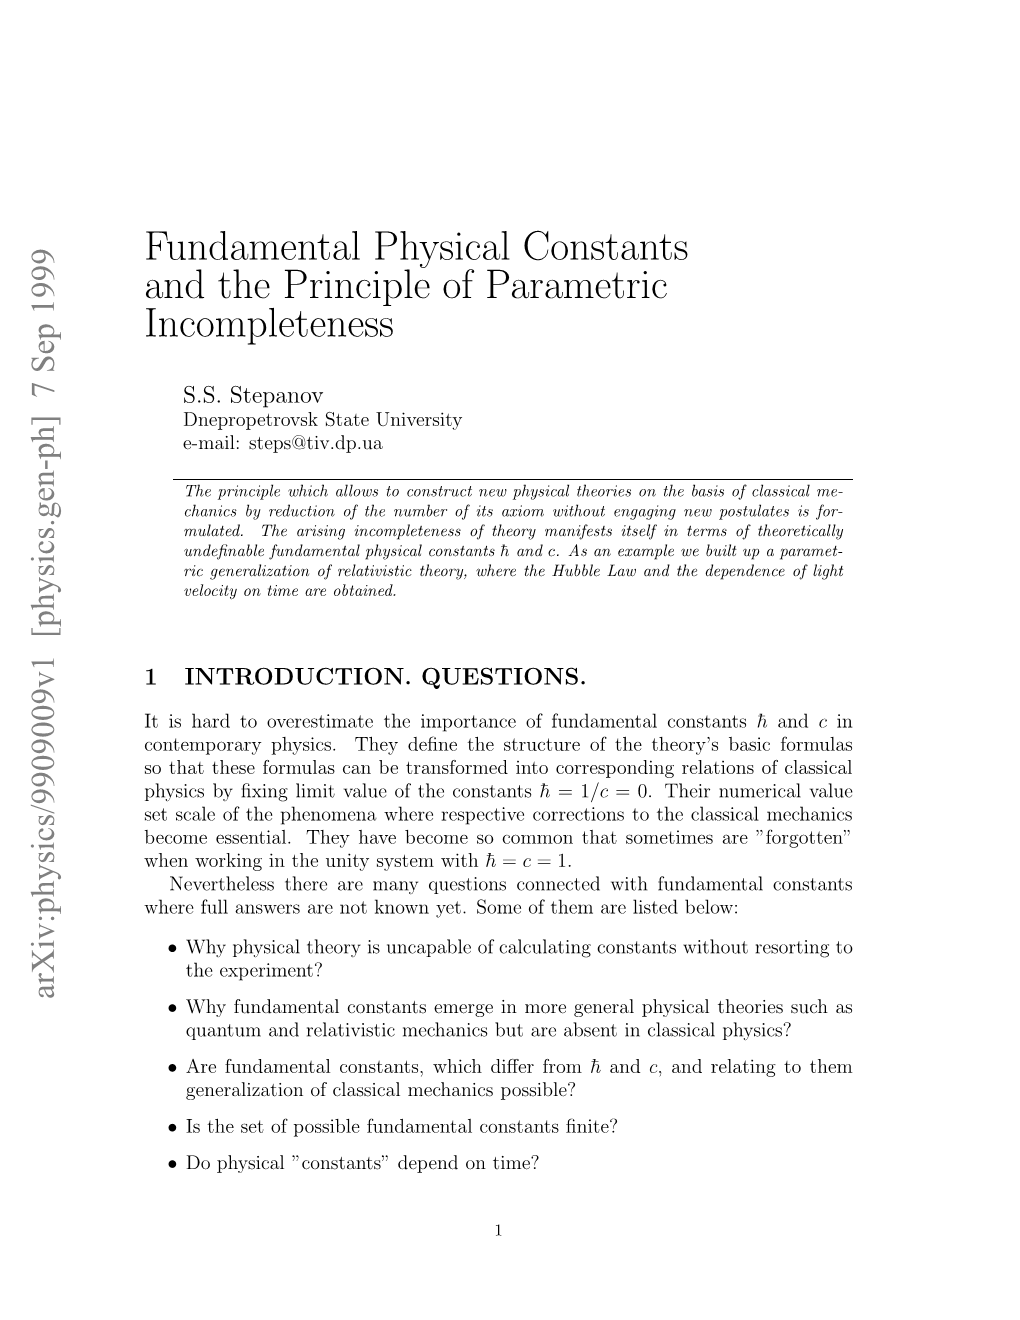 Fundamental Physical Constants and the Principle of Parametric